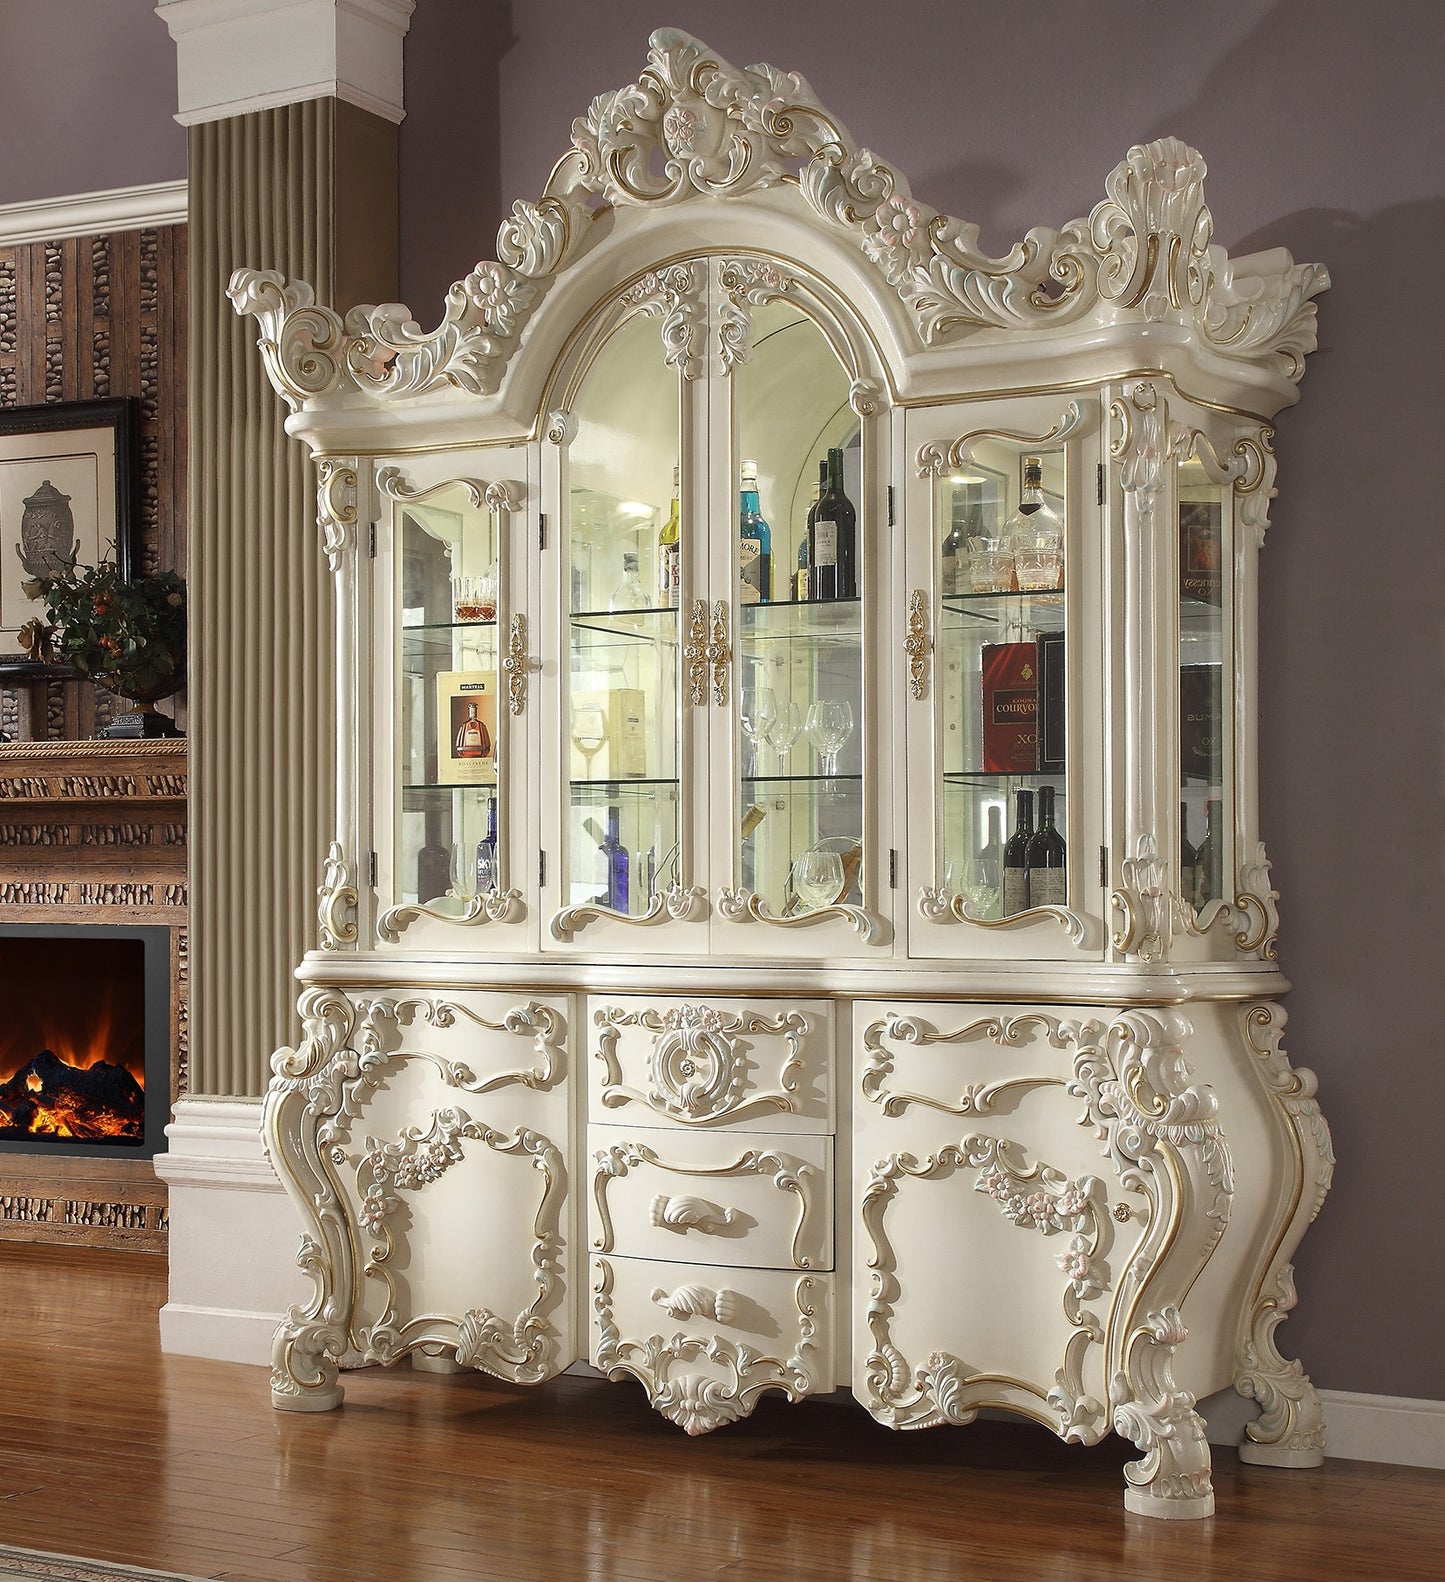 China Cabinet in White Gloss Finish CH8089 European Traditional Victorian